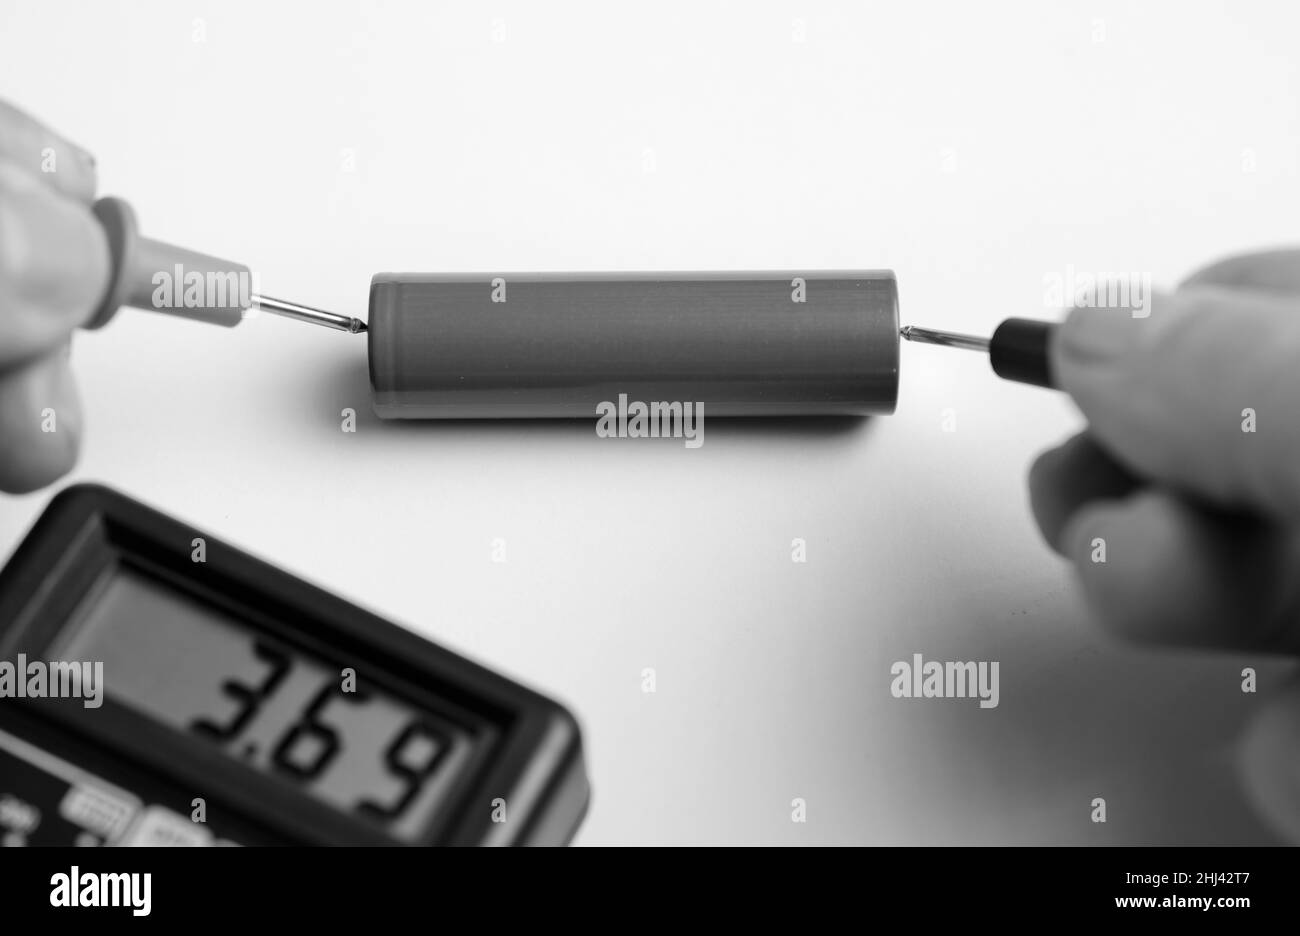 battery with multimeter volt calculator, voltmeter in the hands of a man, red positive pole, black negative pole, on a work table Stock Photo